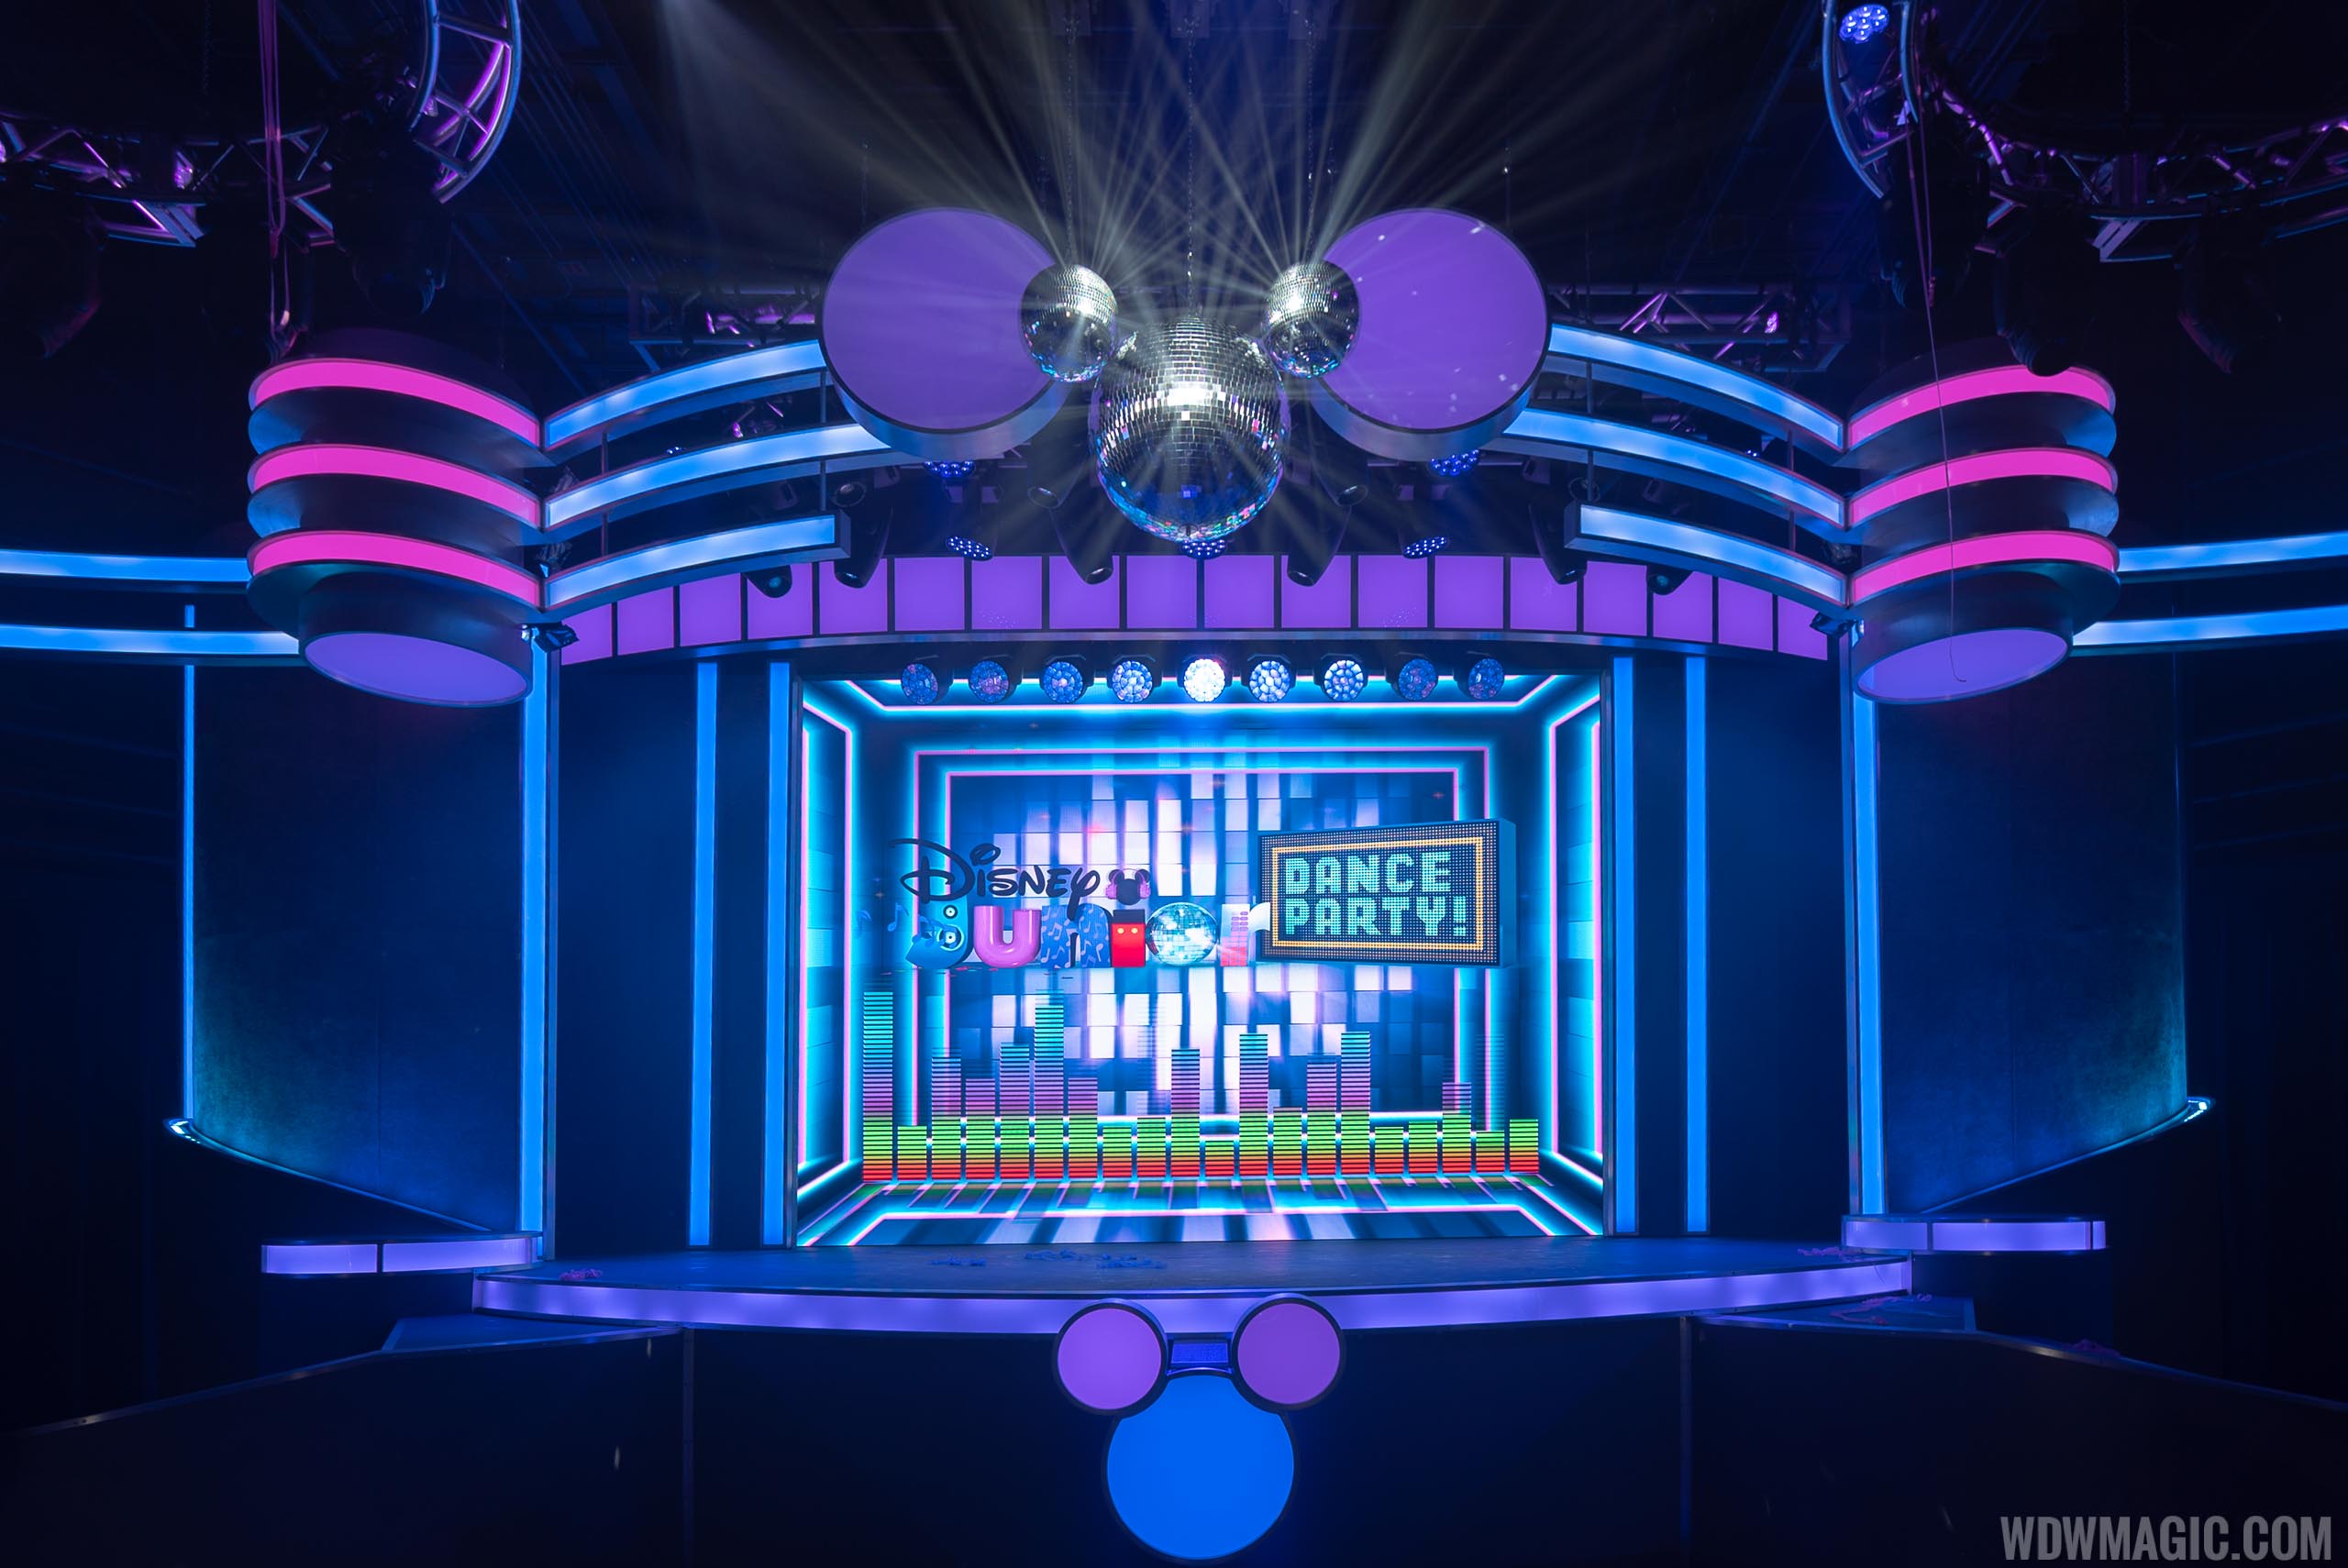 VIDEO - Disney Junior Dance Party officially opens at Disney's